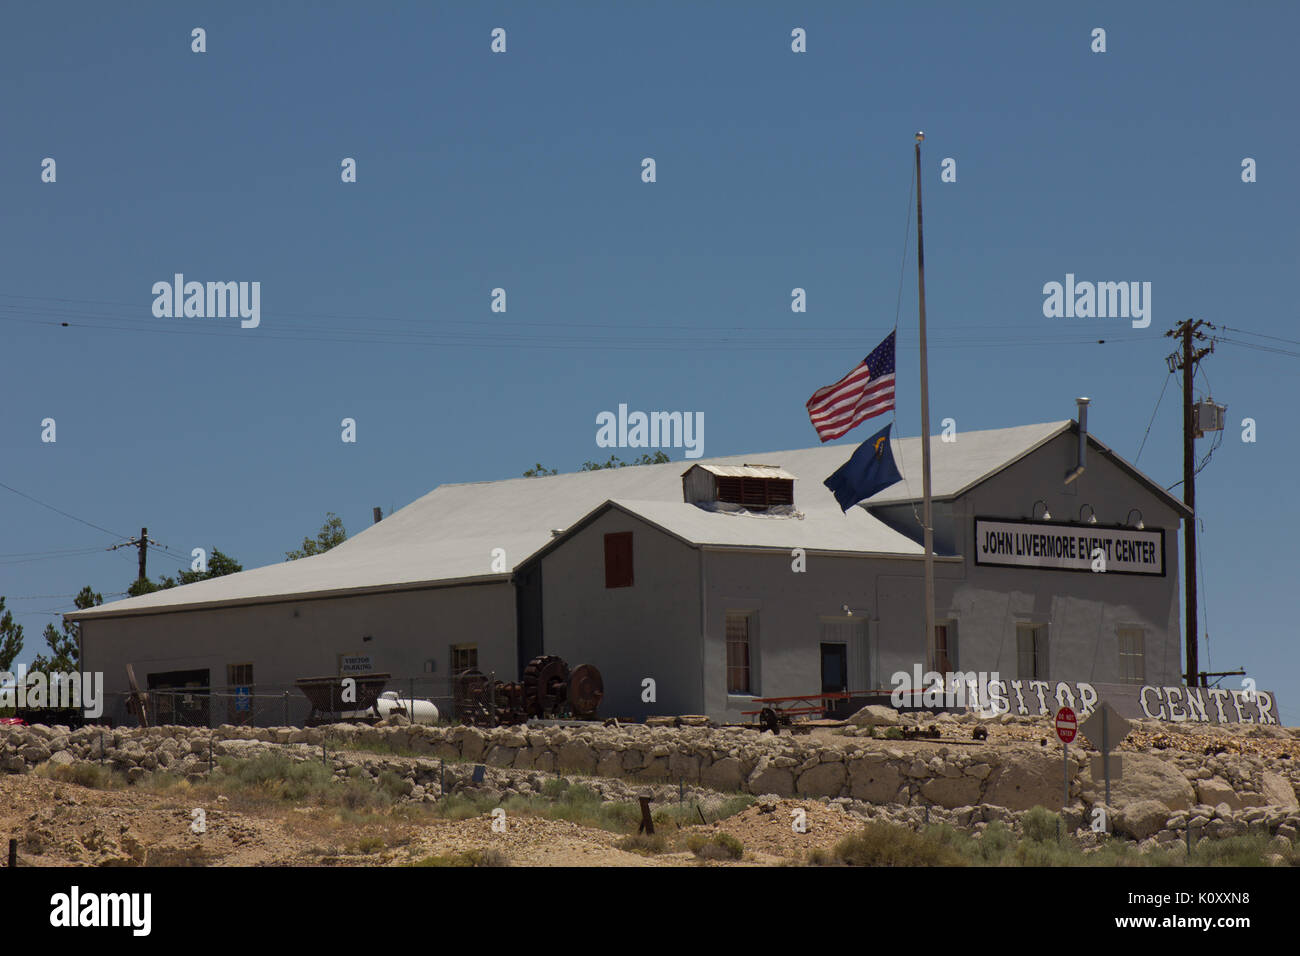 The John Livermore Event Centre, Nevada, with flag at half mast due to the Dallas shootings. Stock Photo